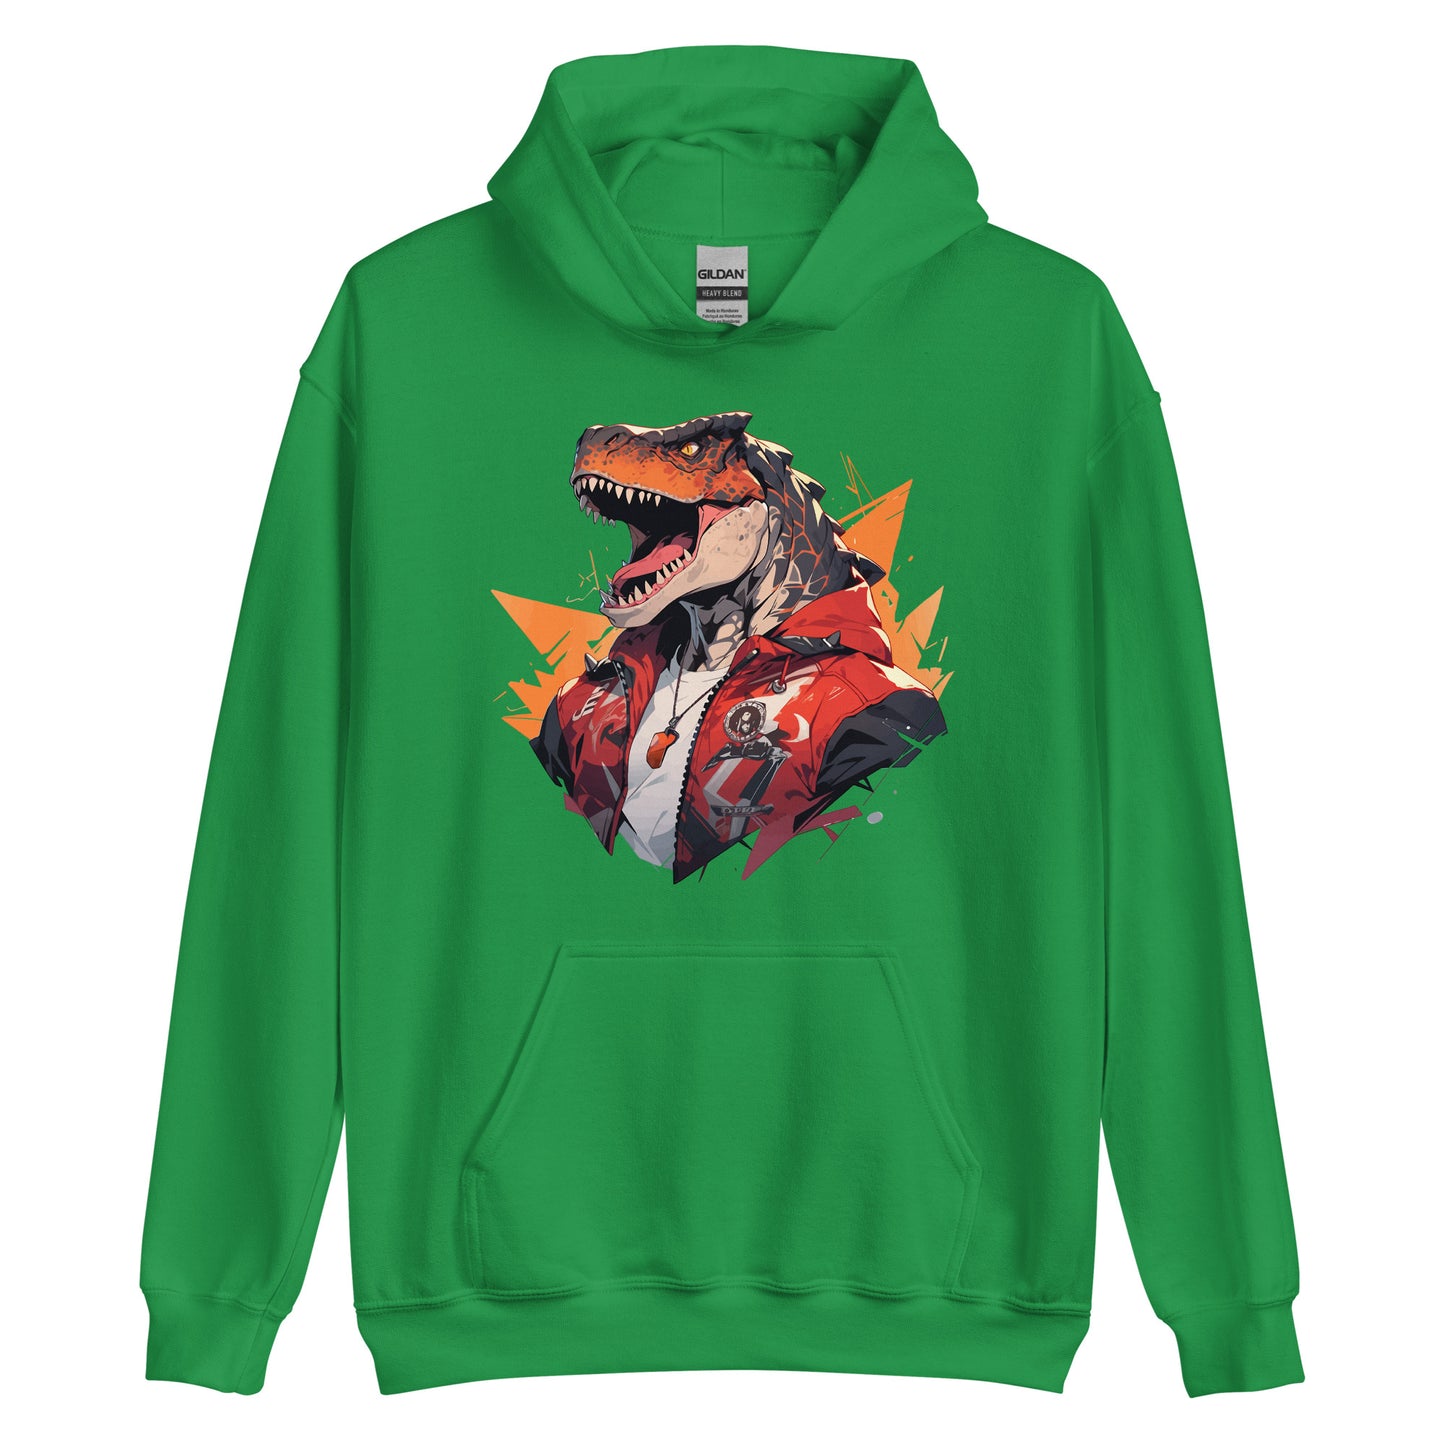 Confident grip and strong jaw, Dinosaur sports trainer in red jacket, Most stylish reptile in the urban jungle, Dino roar - Unisex Hoodie